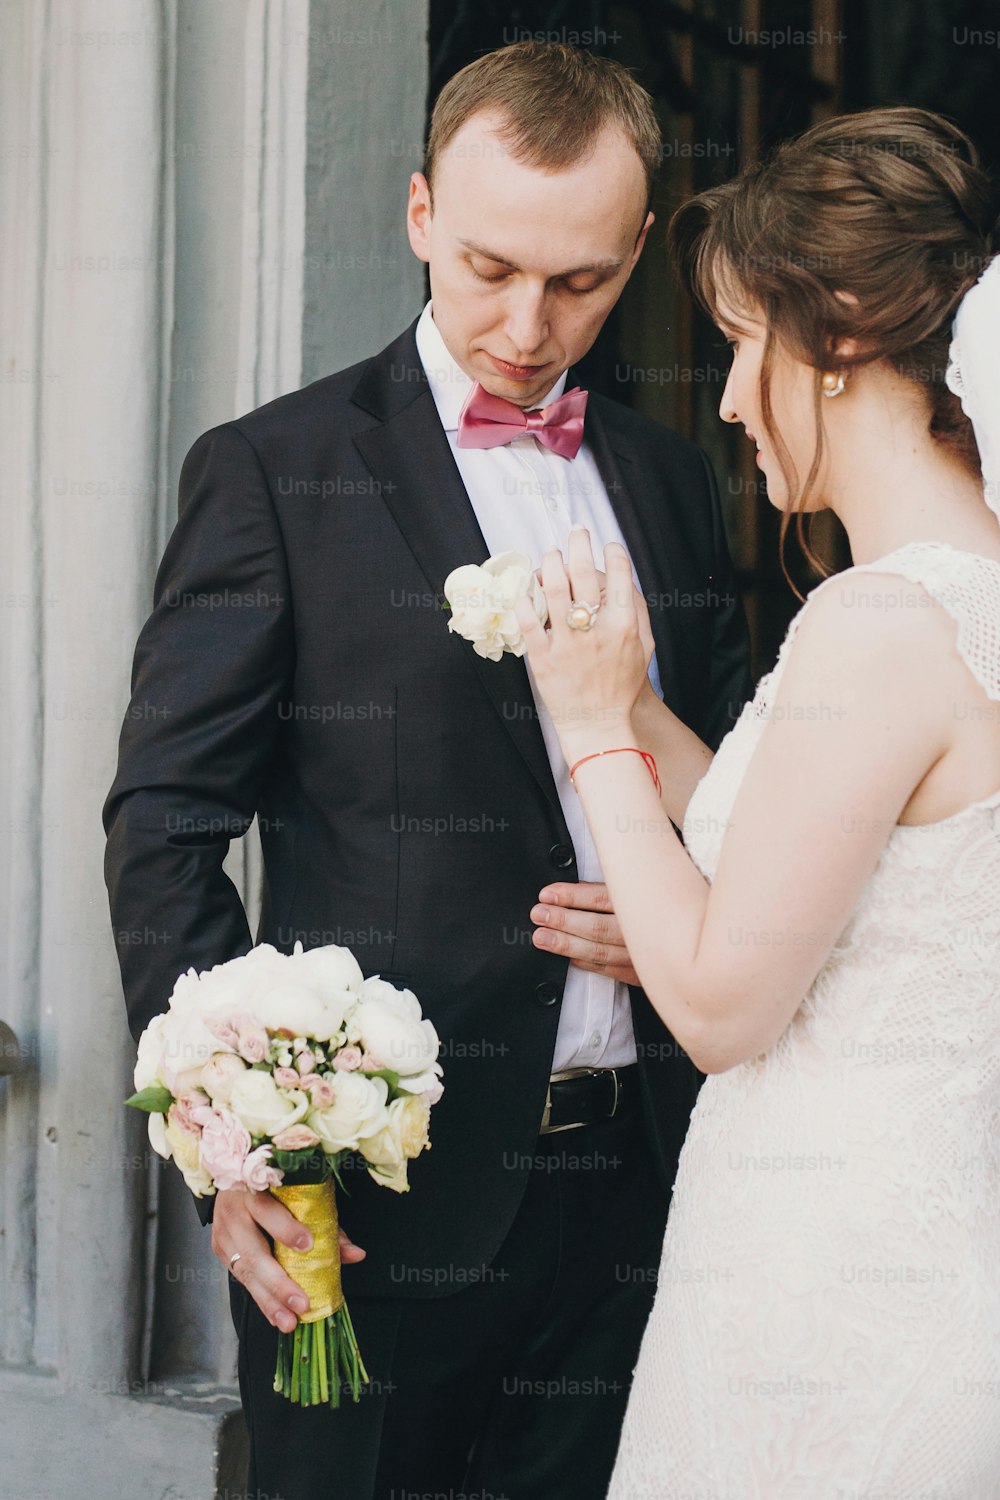 Happy Bride putting on stylish boutonniere on groom suit at doors after wedding ceremony in church. Happy stylish wedding couple during holy matrimony